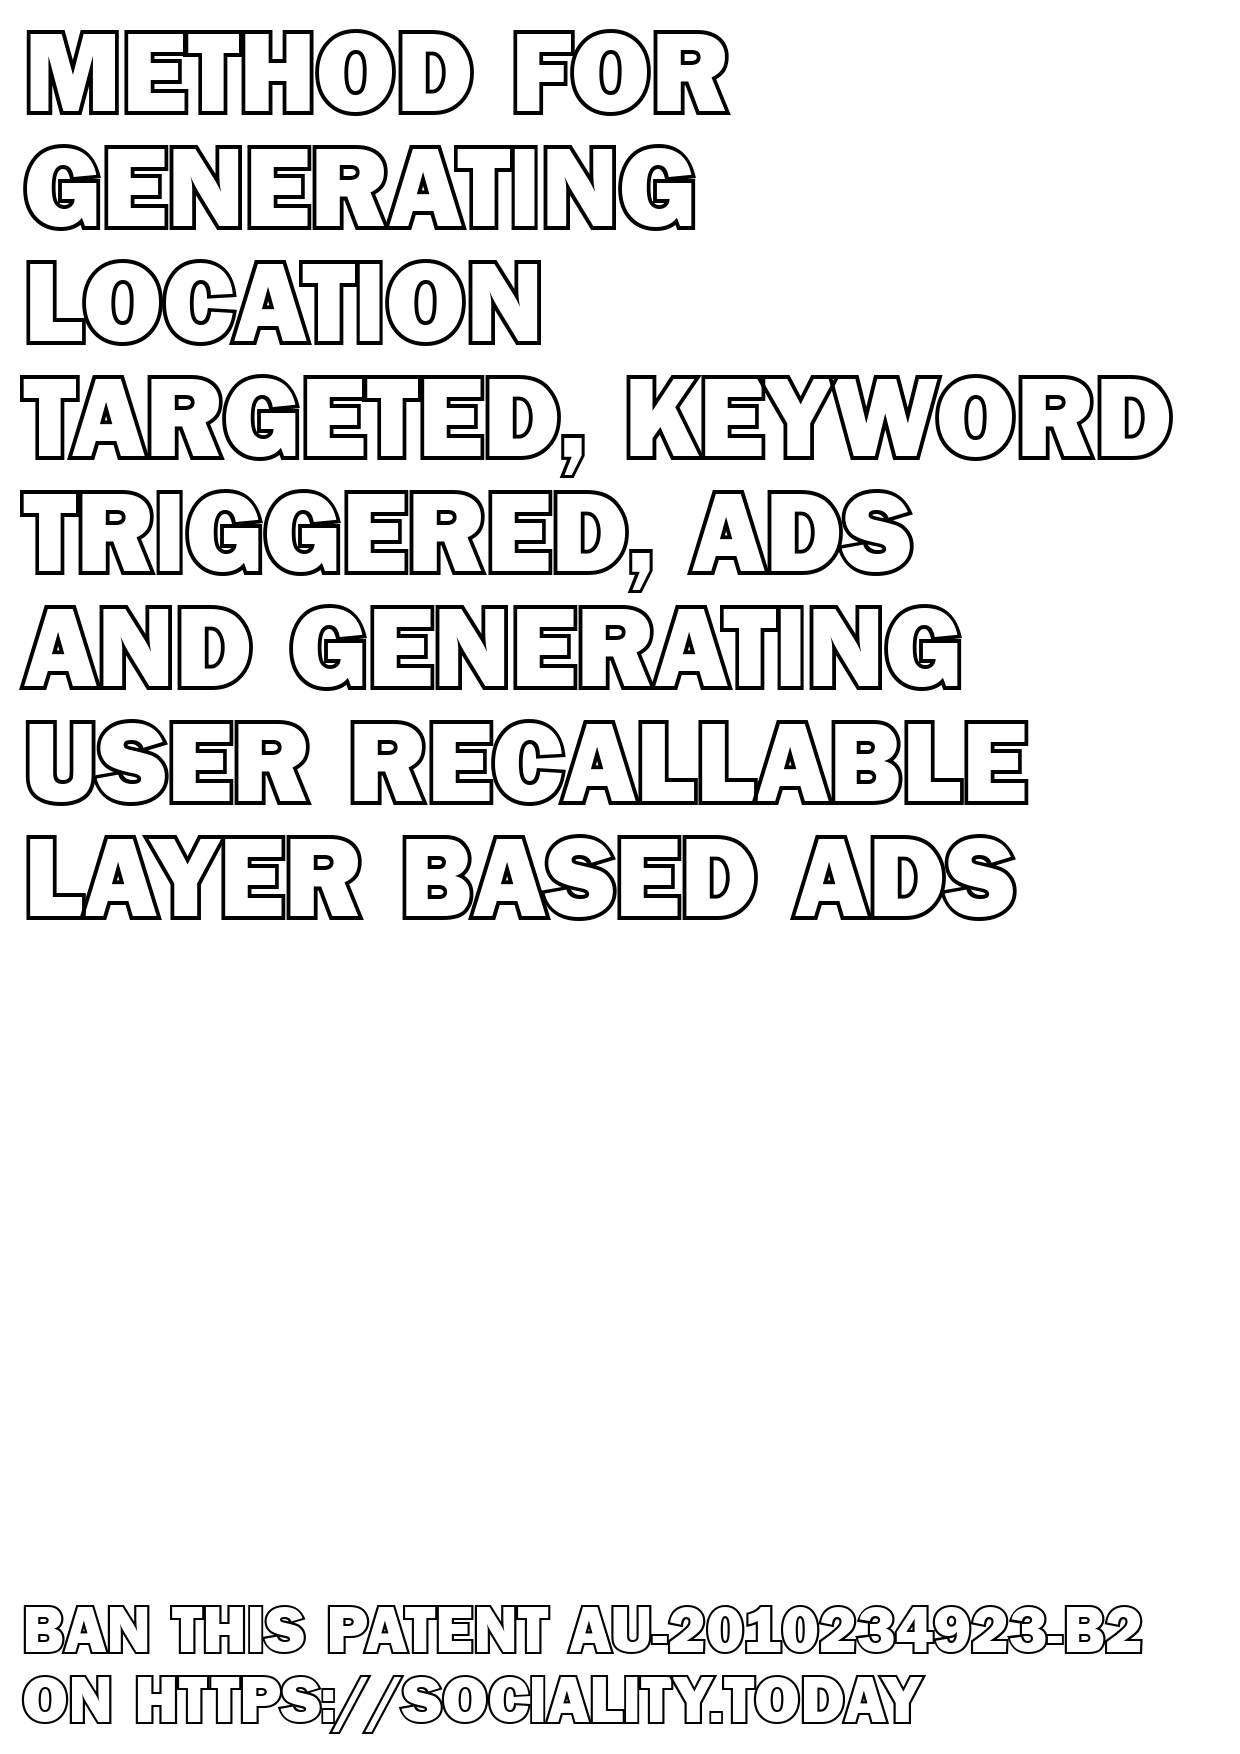 Method for generating location targeted, keyword-triggered, ads and generating user recallable layer-based ads  - AU-2010234923-B2